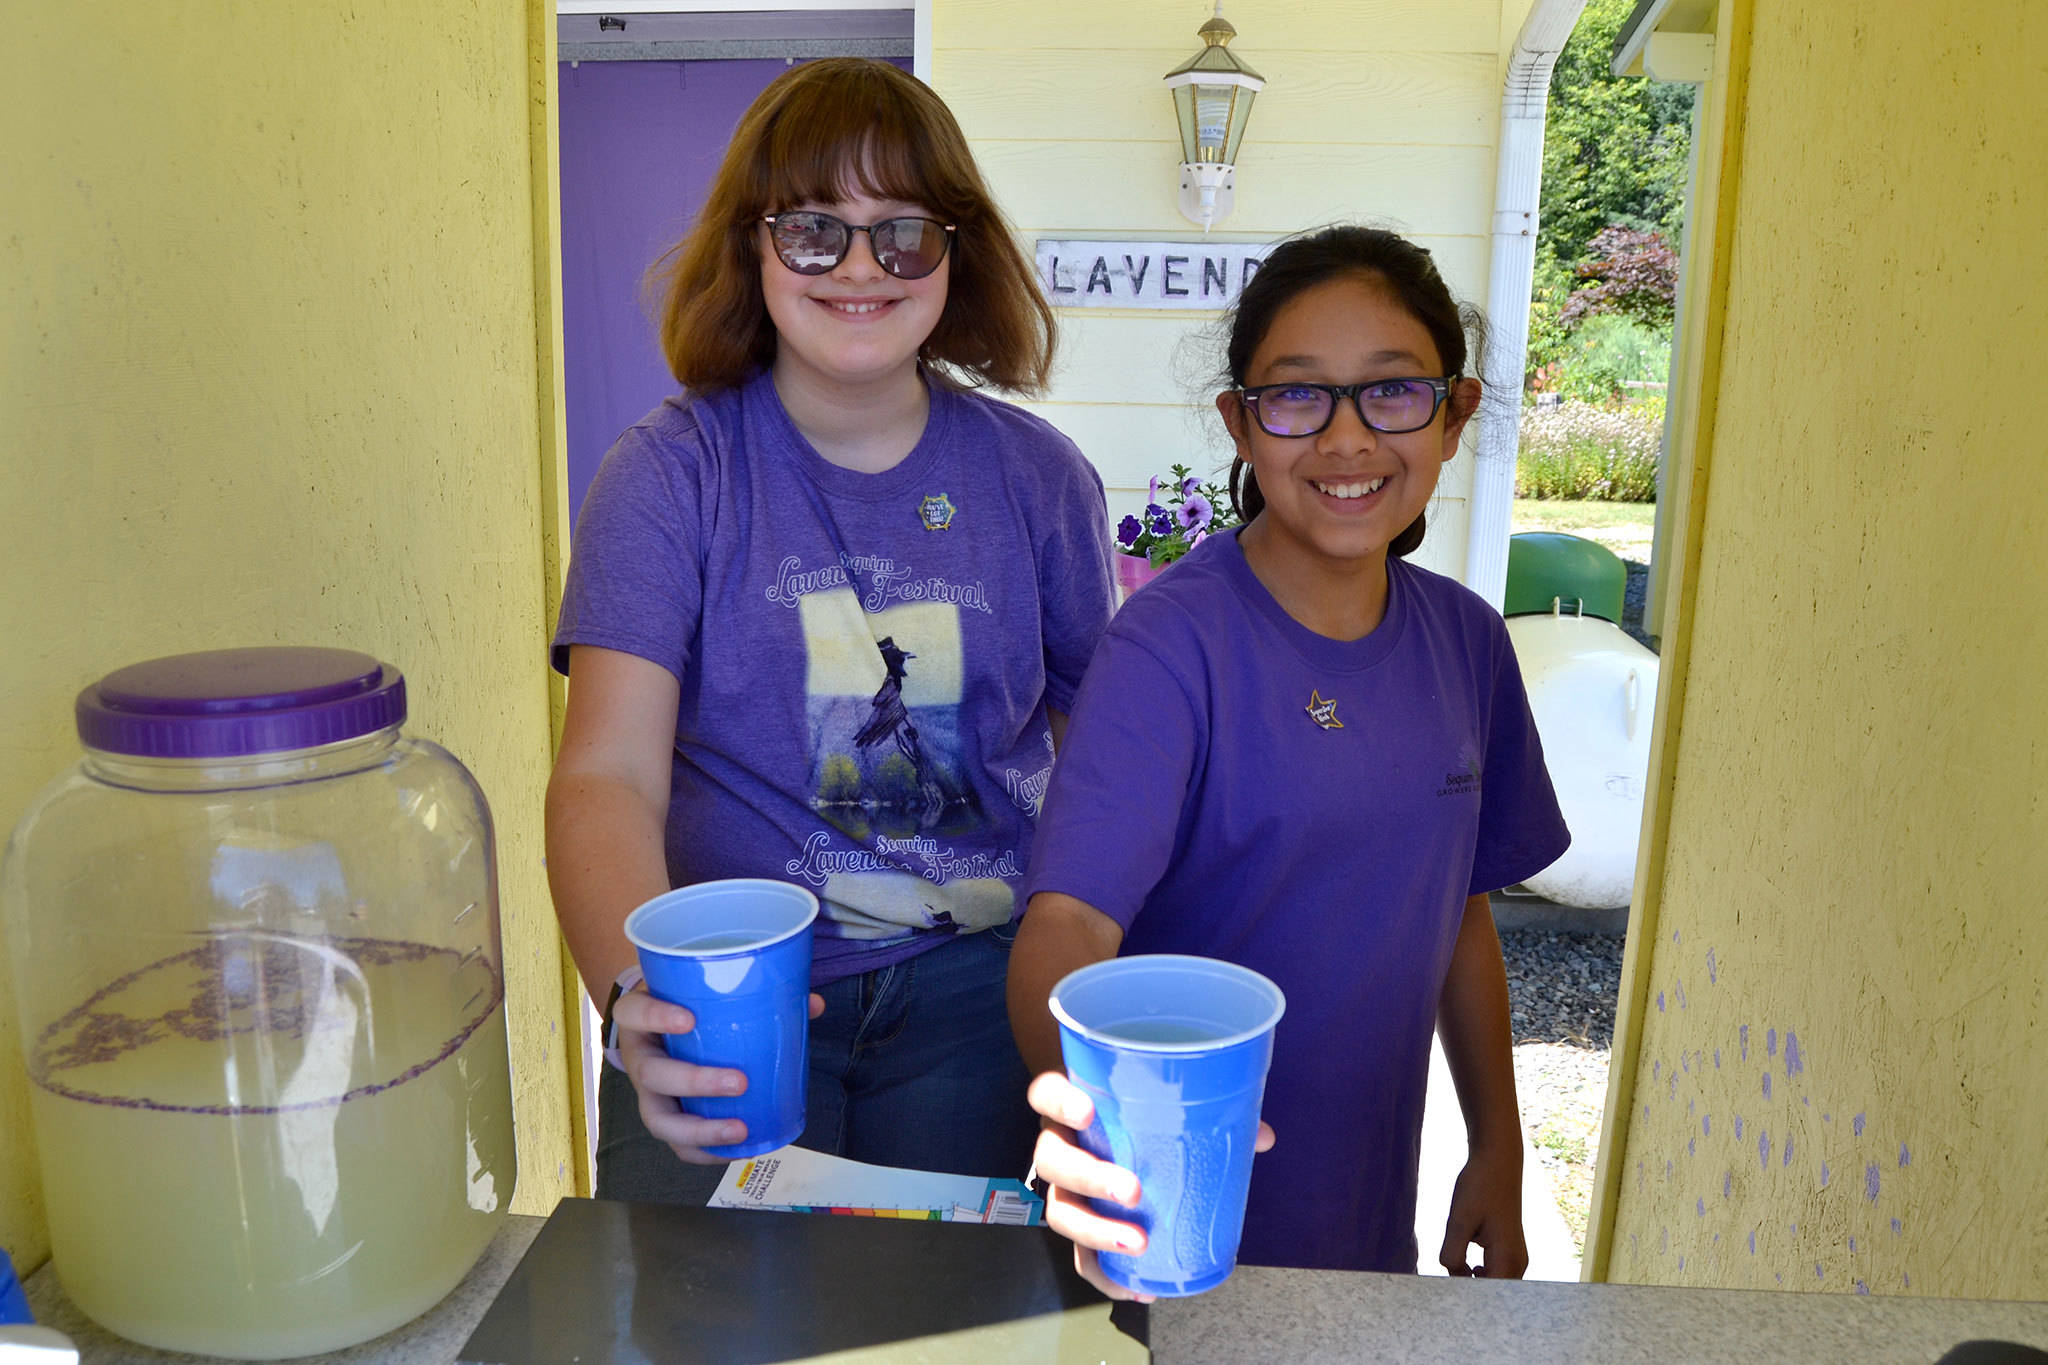 Tilly Lundstrom and Ali Edgecombe serve up lavender lemonade at the Nelson’s Duckpond & Lavender Farm last year as a benefit for the Sequim Food Bank. The farm’s co-owner Amy Lundstrom said she plans to reopen on June 1, but she’s uncertain what provisions she’ll be taken for visitors such as moving her farm store outdoors. Sequim Gazette photo by Matthew Nash